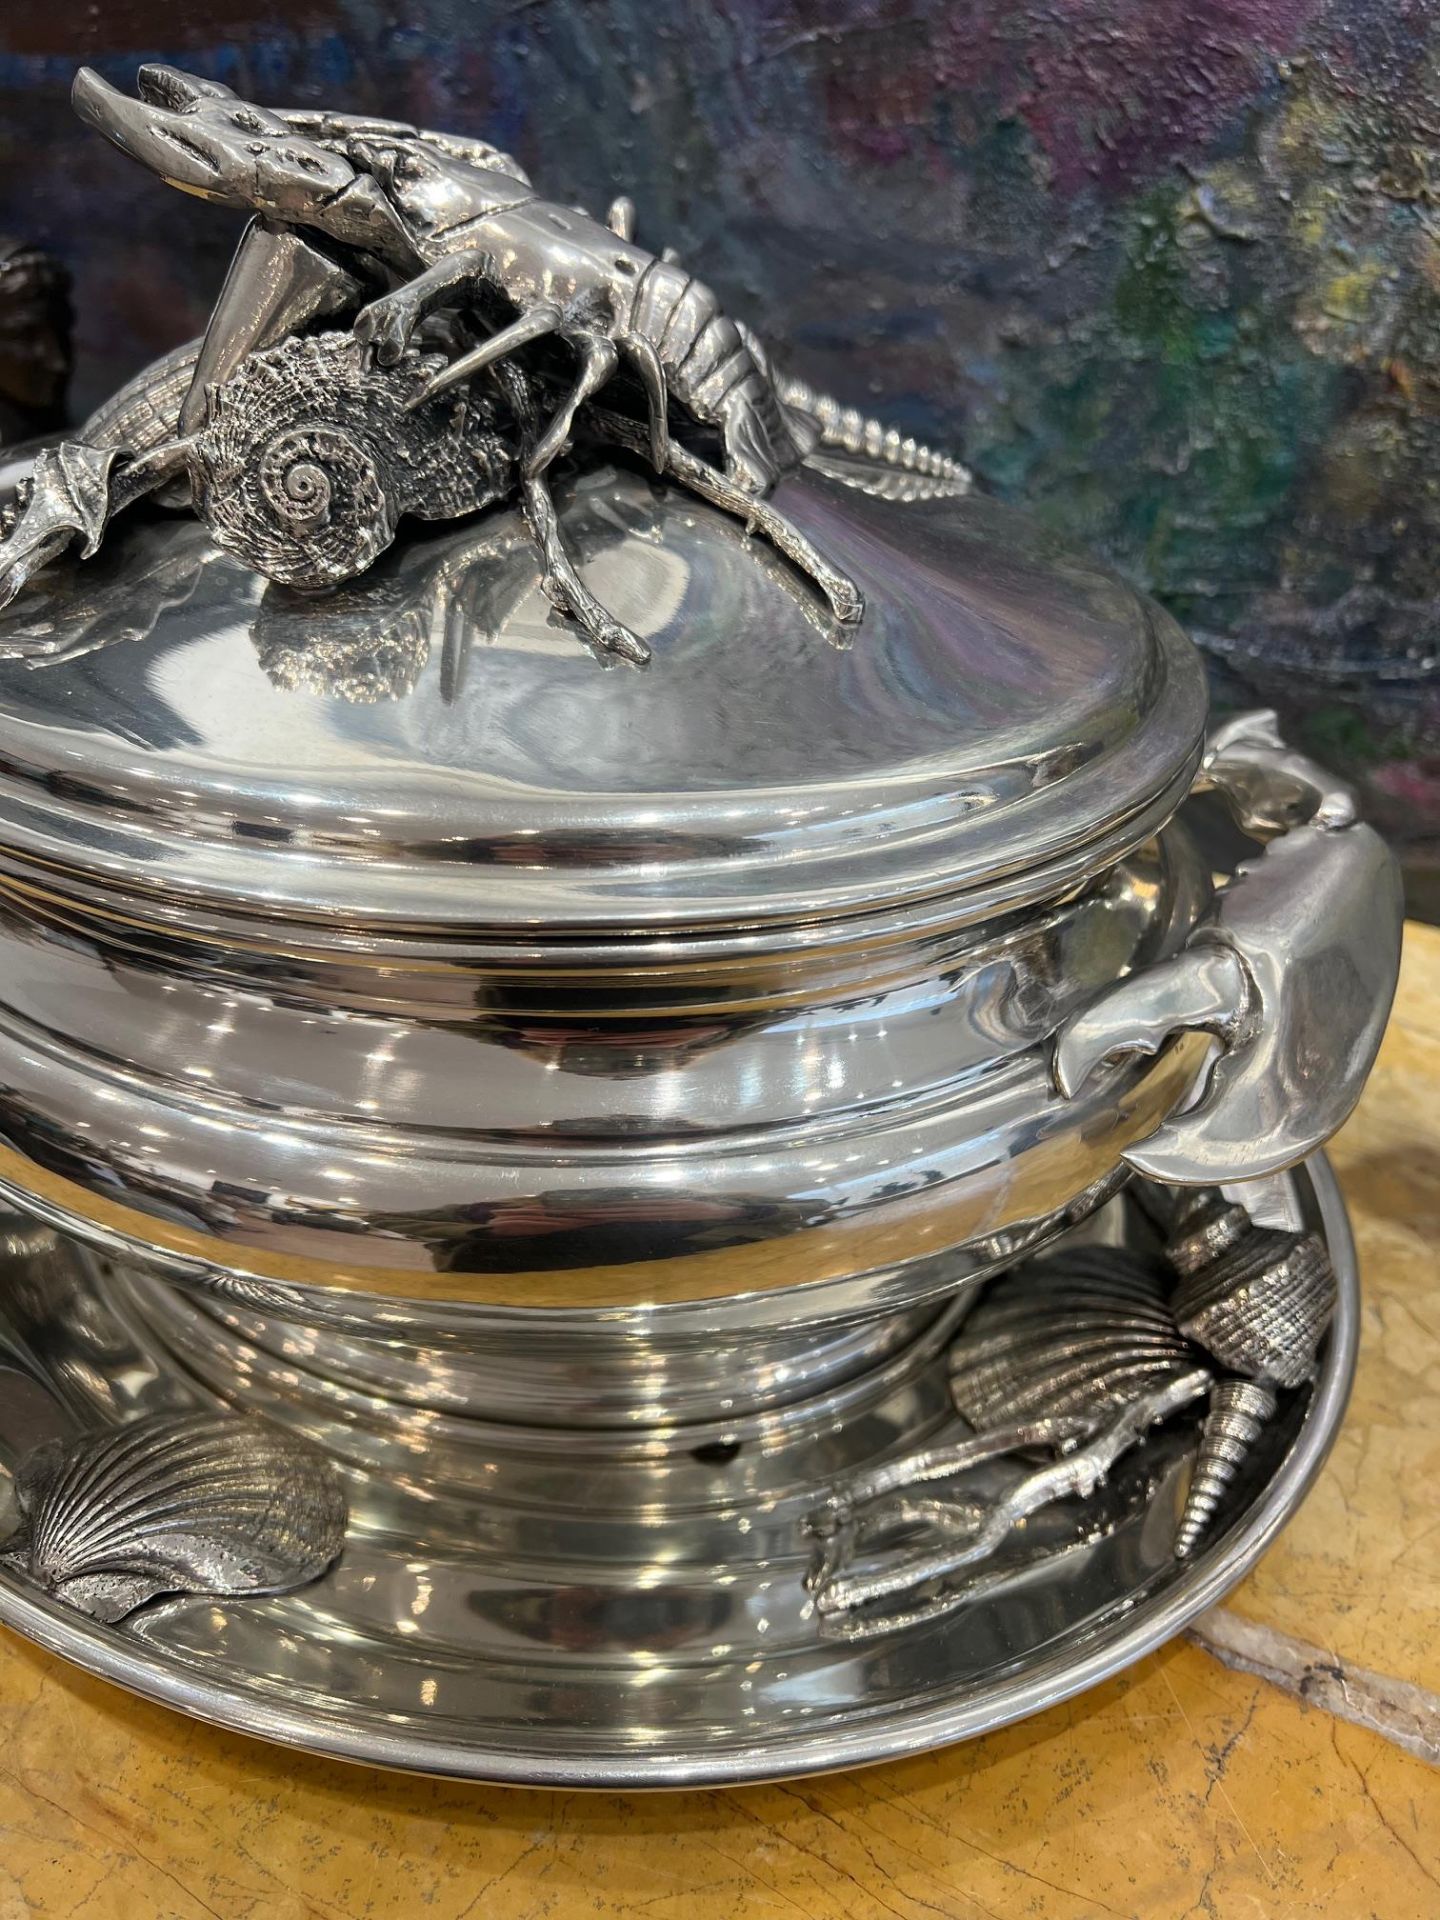 A LARGE ITALIAN SILVER PLATED SOUP TUREEN IN THE STYLE OF BUCCELLATI - Image 3 of 11